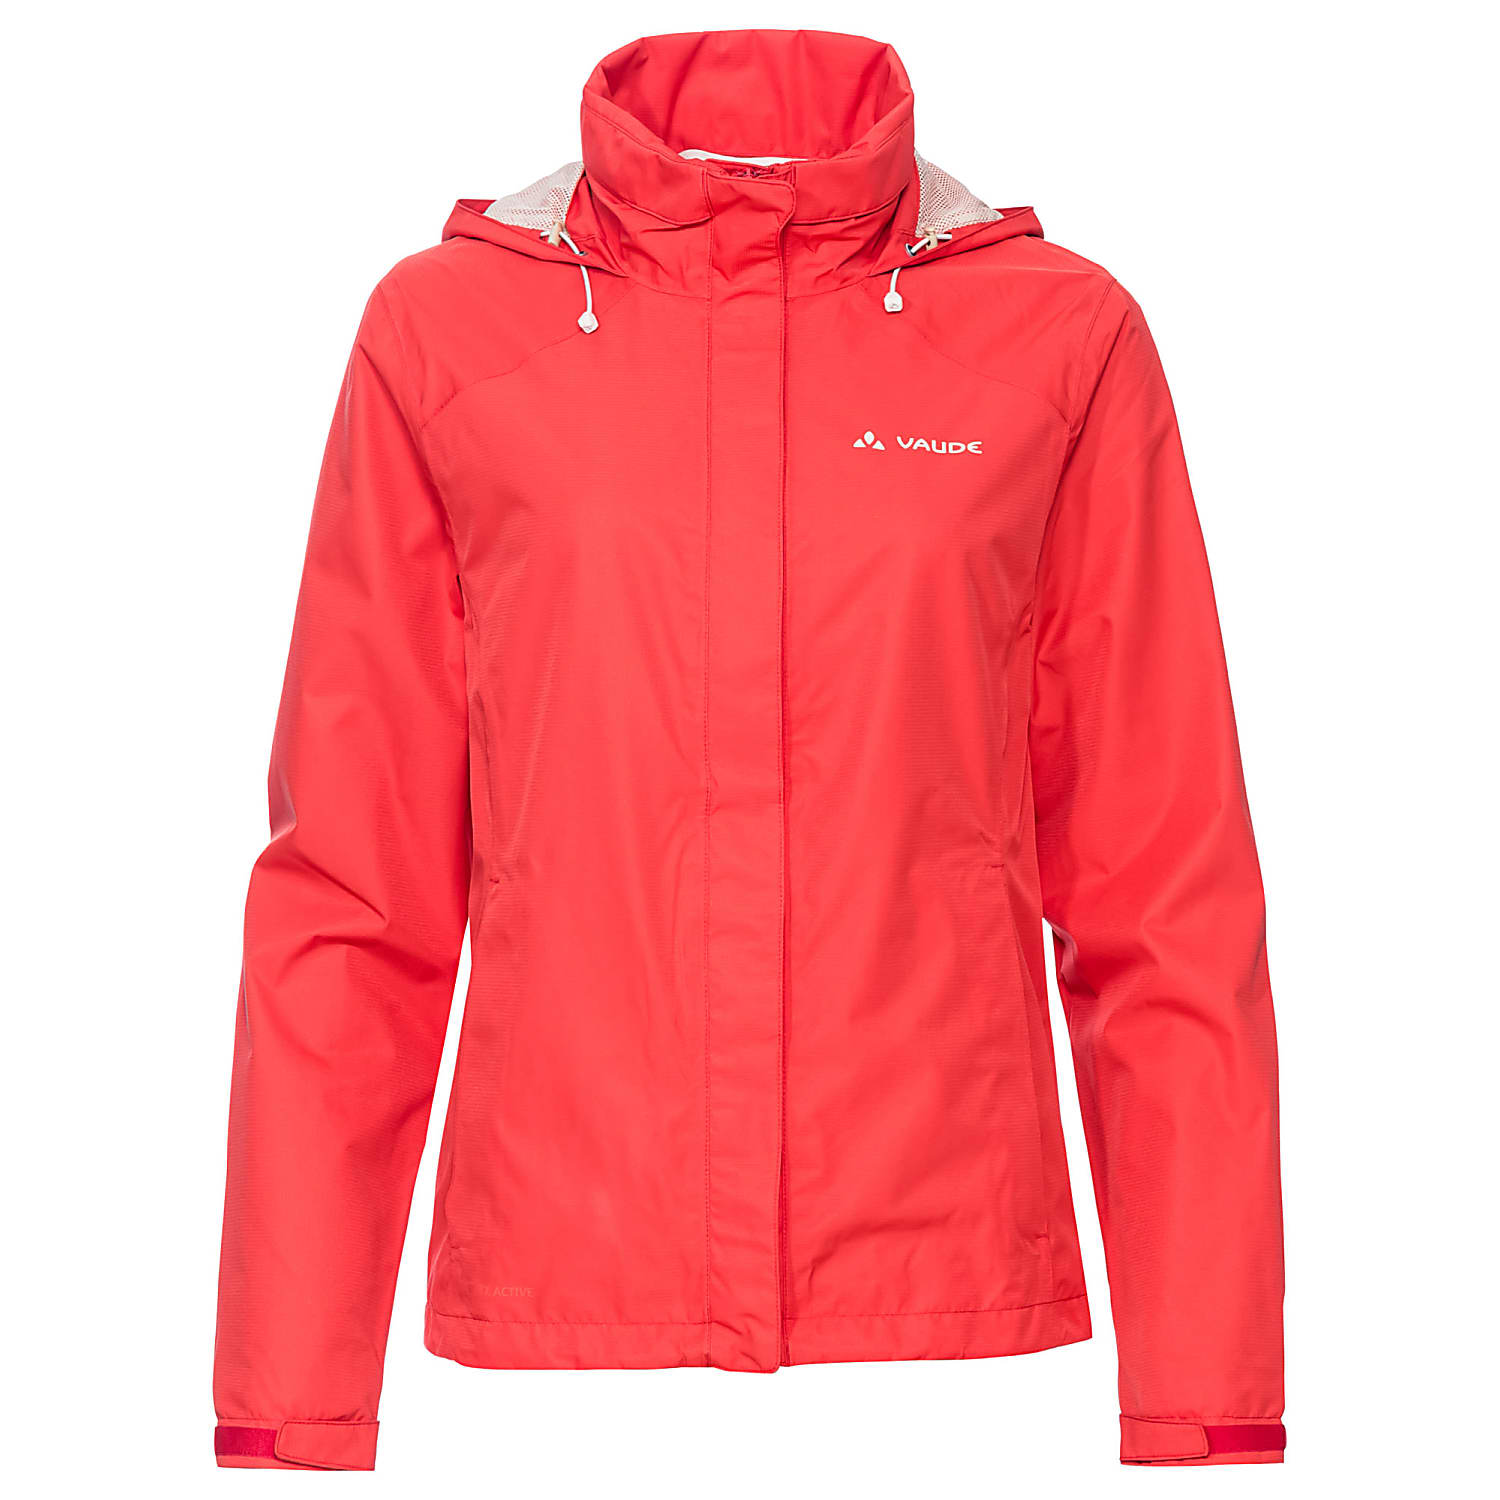 cheap WOMENS ESCAPE Fast LIGHT BIKE shipping - Vaude JACKET, Flame and